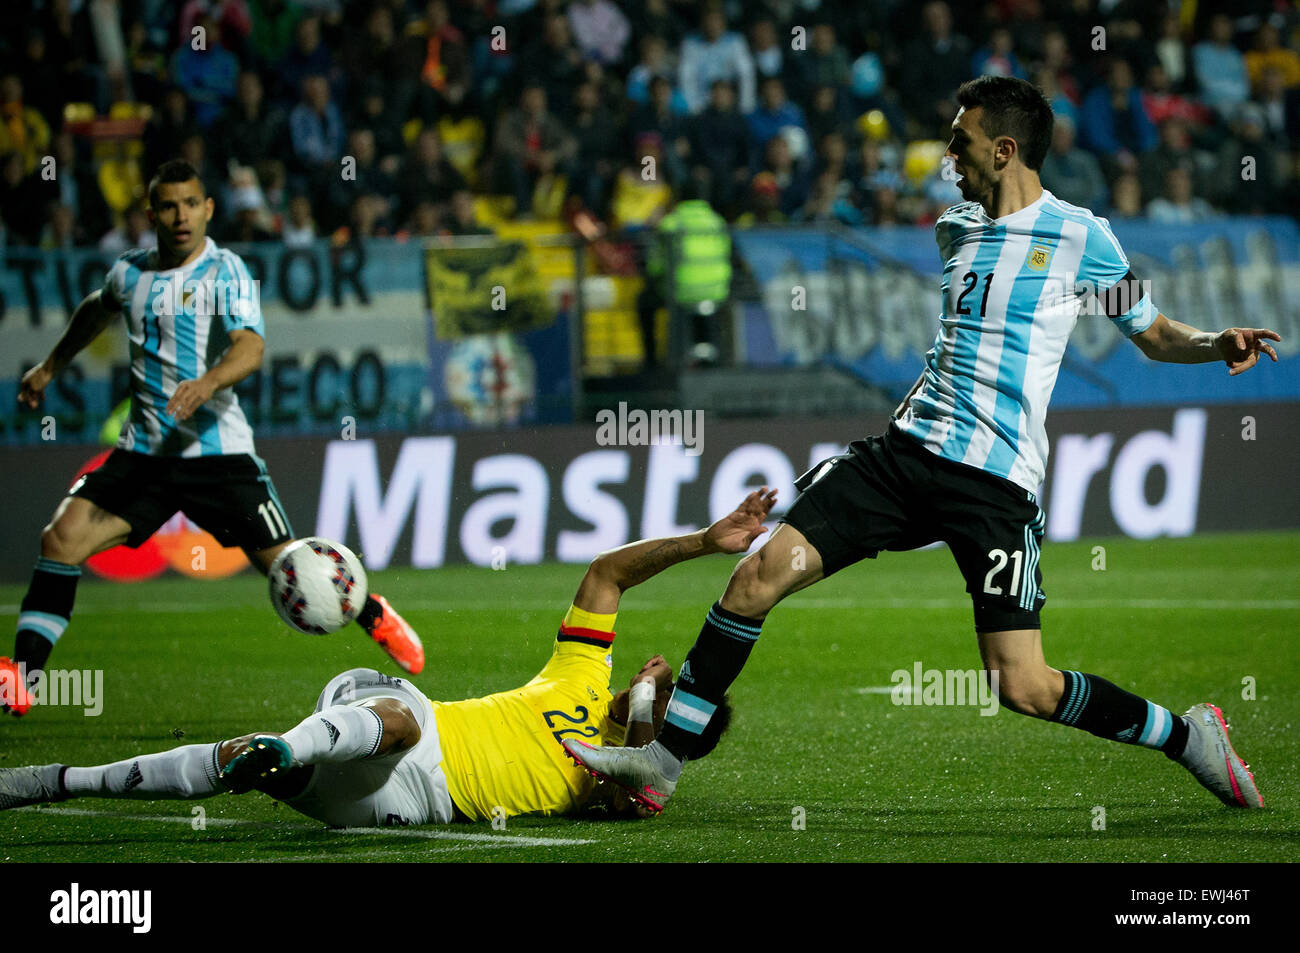 Vina Del Mar, Chile. 26th June, 2015. Argentina's Javier Pastore (R) vies the ball with Colombia's Jeison Murillo during the quarter-final match between Argentina and Colombia at the Copa America Chile 2015 in the El Sausalito Stadium, in Vina del Mar city, Chile, on June 26, 2015. Credit:  Pedro Mera/Xinhua/Alamy Live News Stock Photo